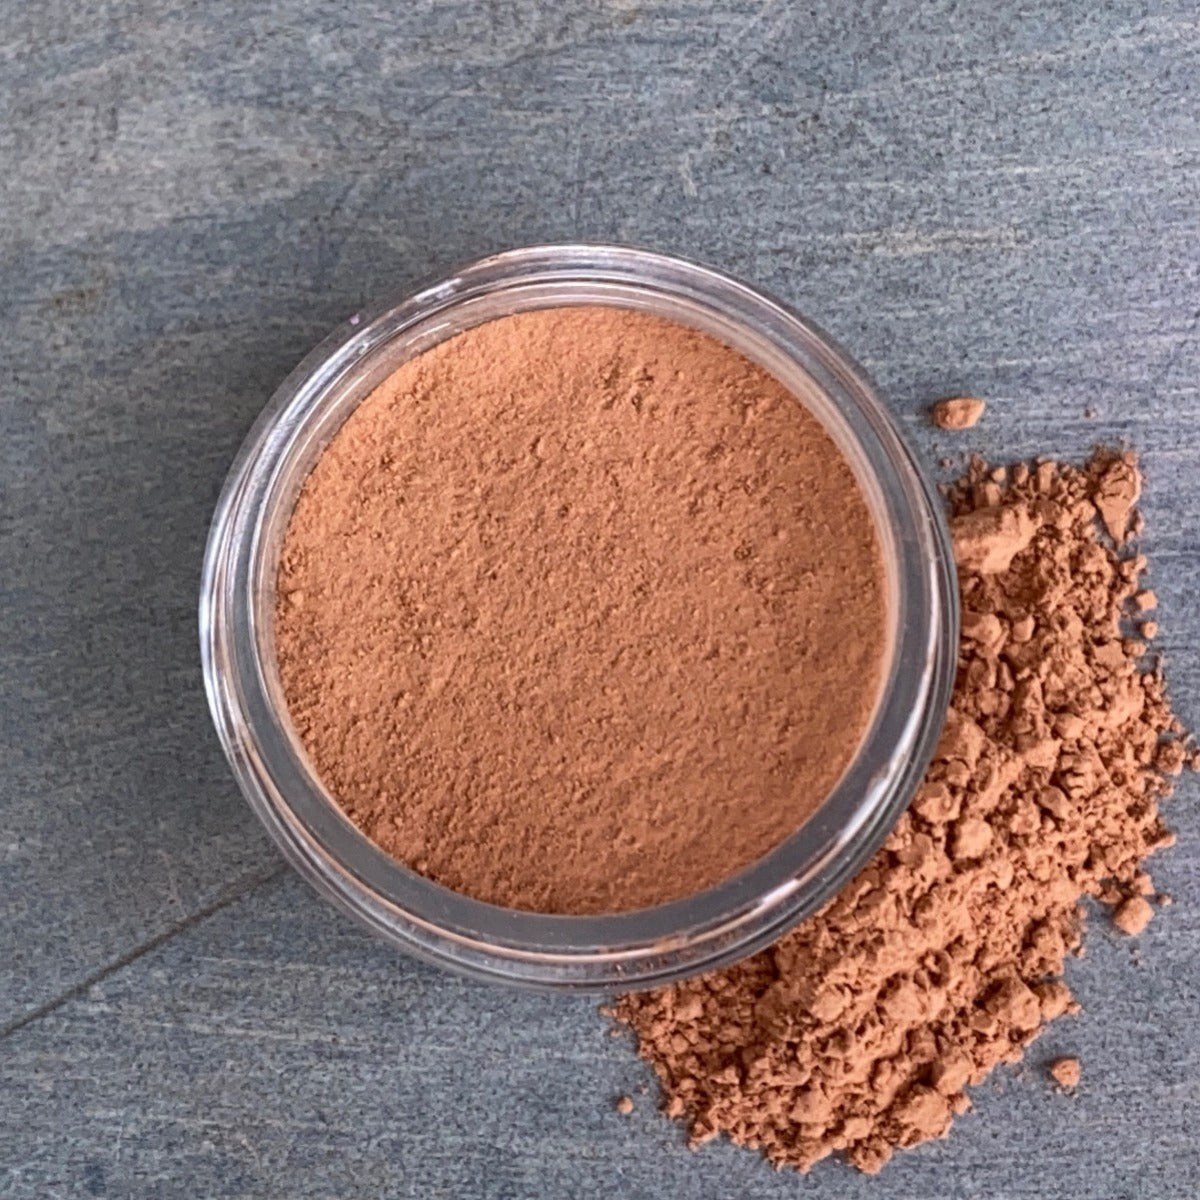 Beach Tan Powder Bronzer with product on rock background